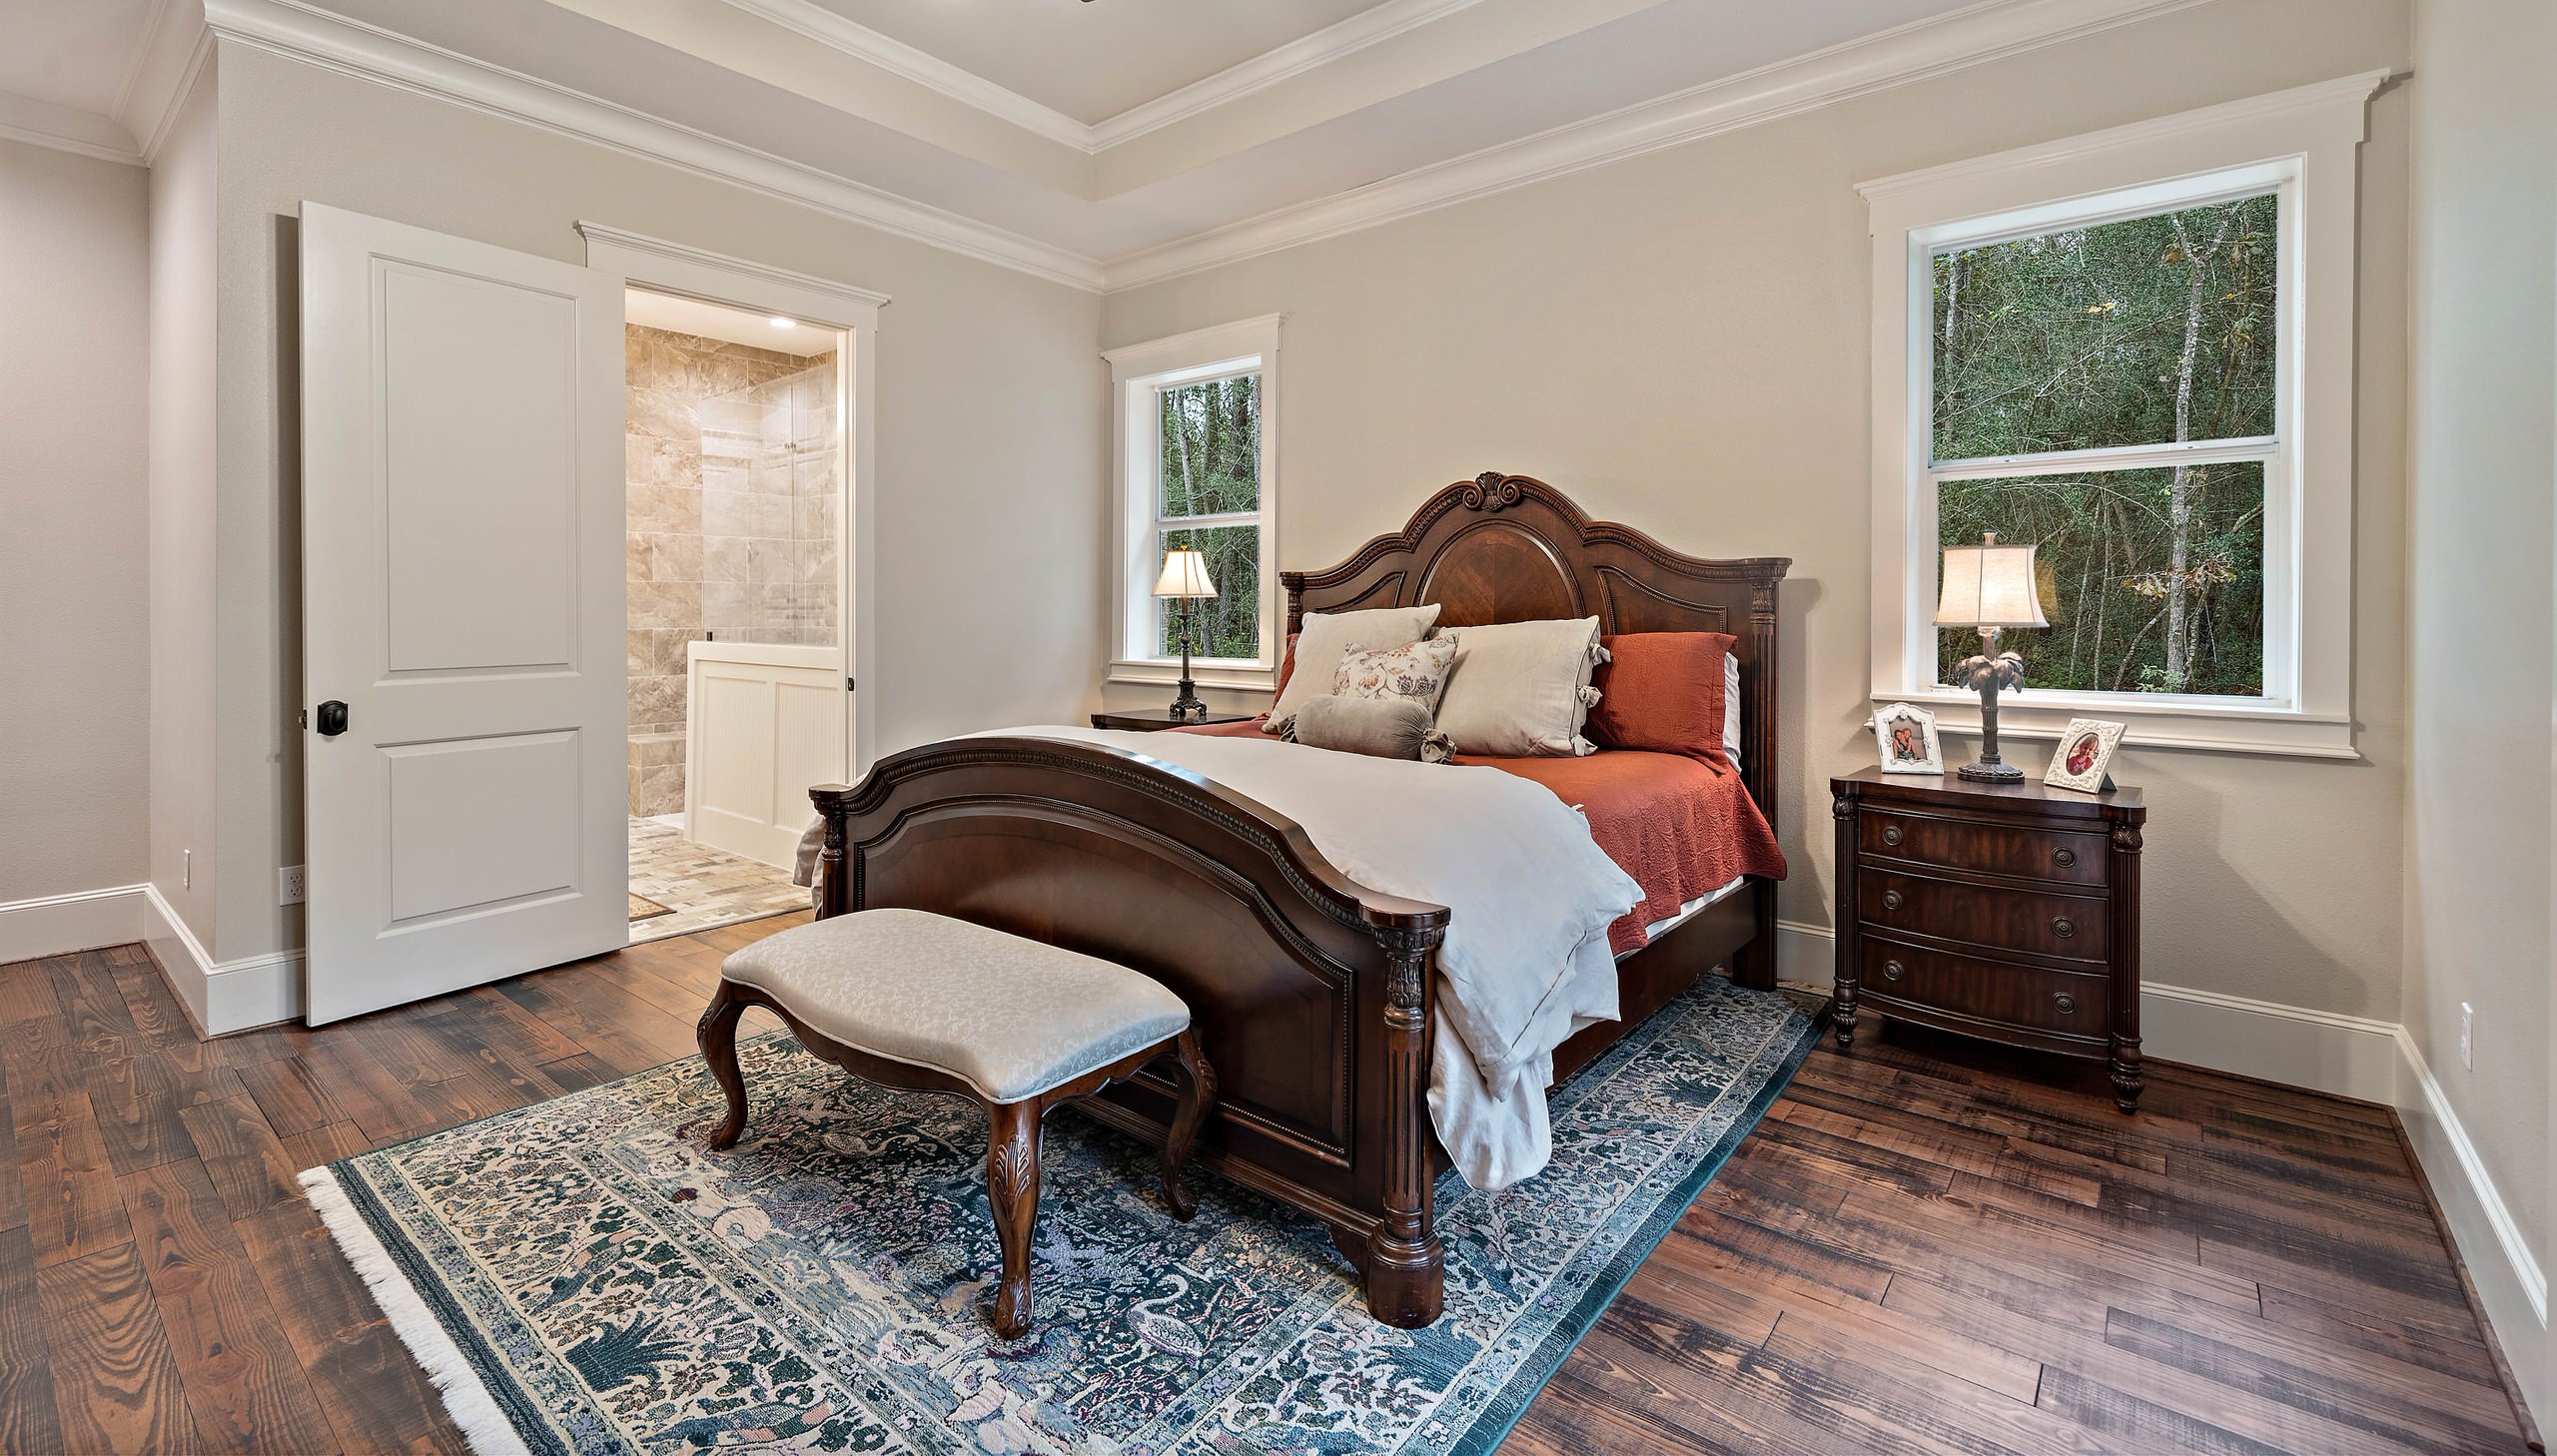 75 Beautiful French Country Bedroom Pictures Ideas September 2021 Houzz - French Country Style Bedroom Decorating Ideas